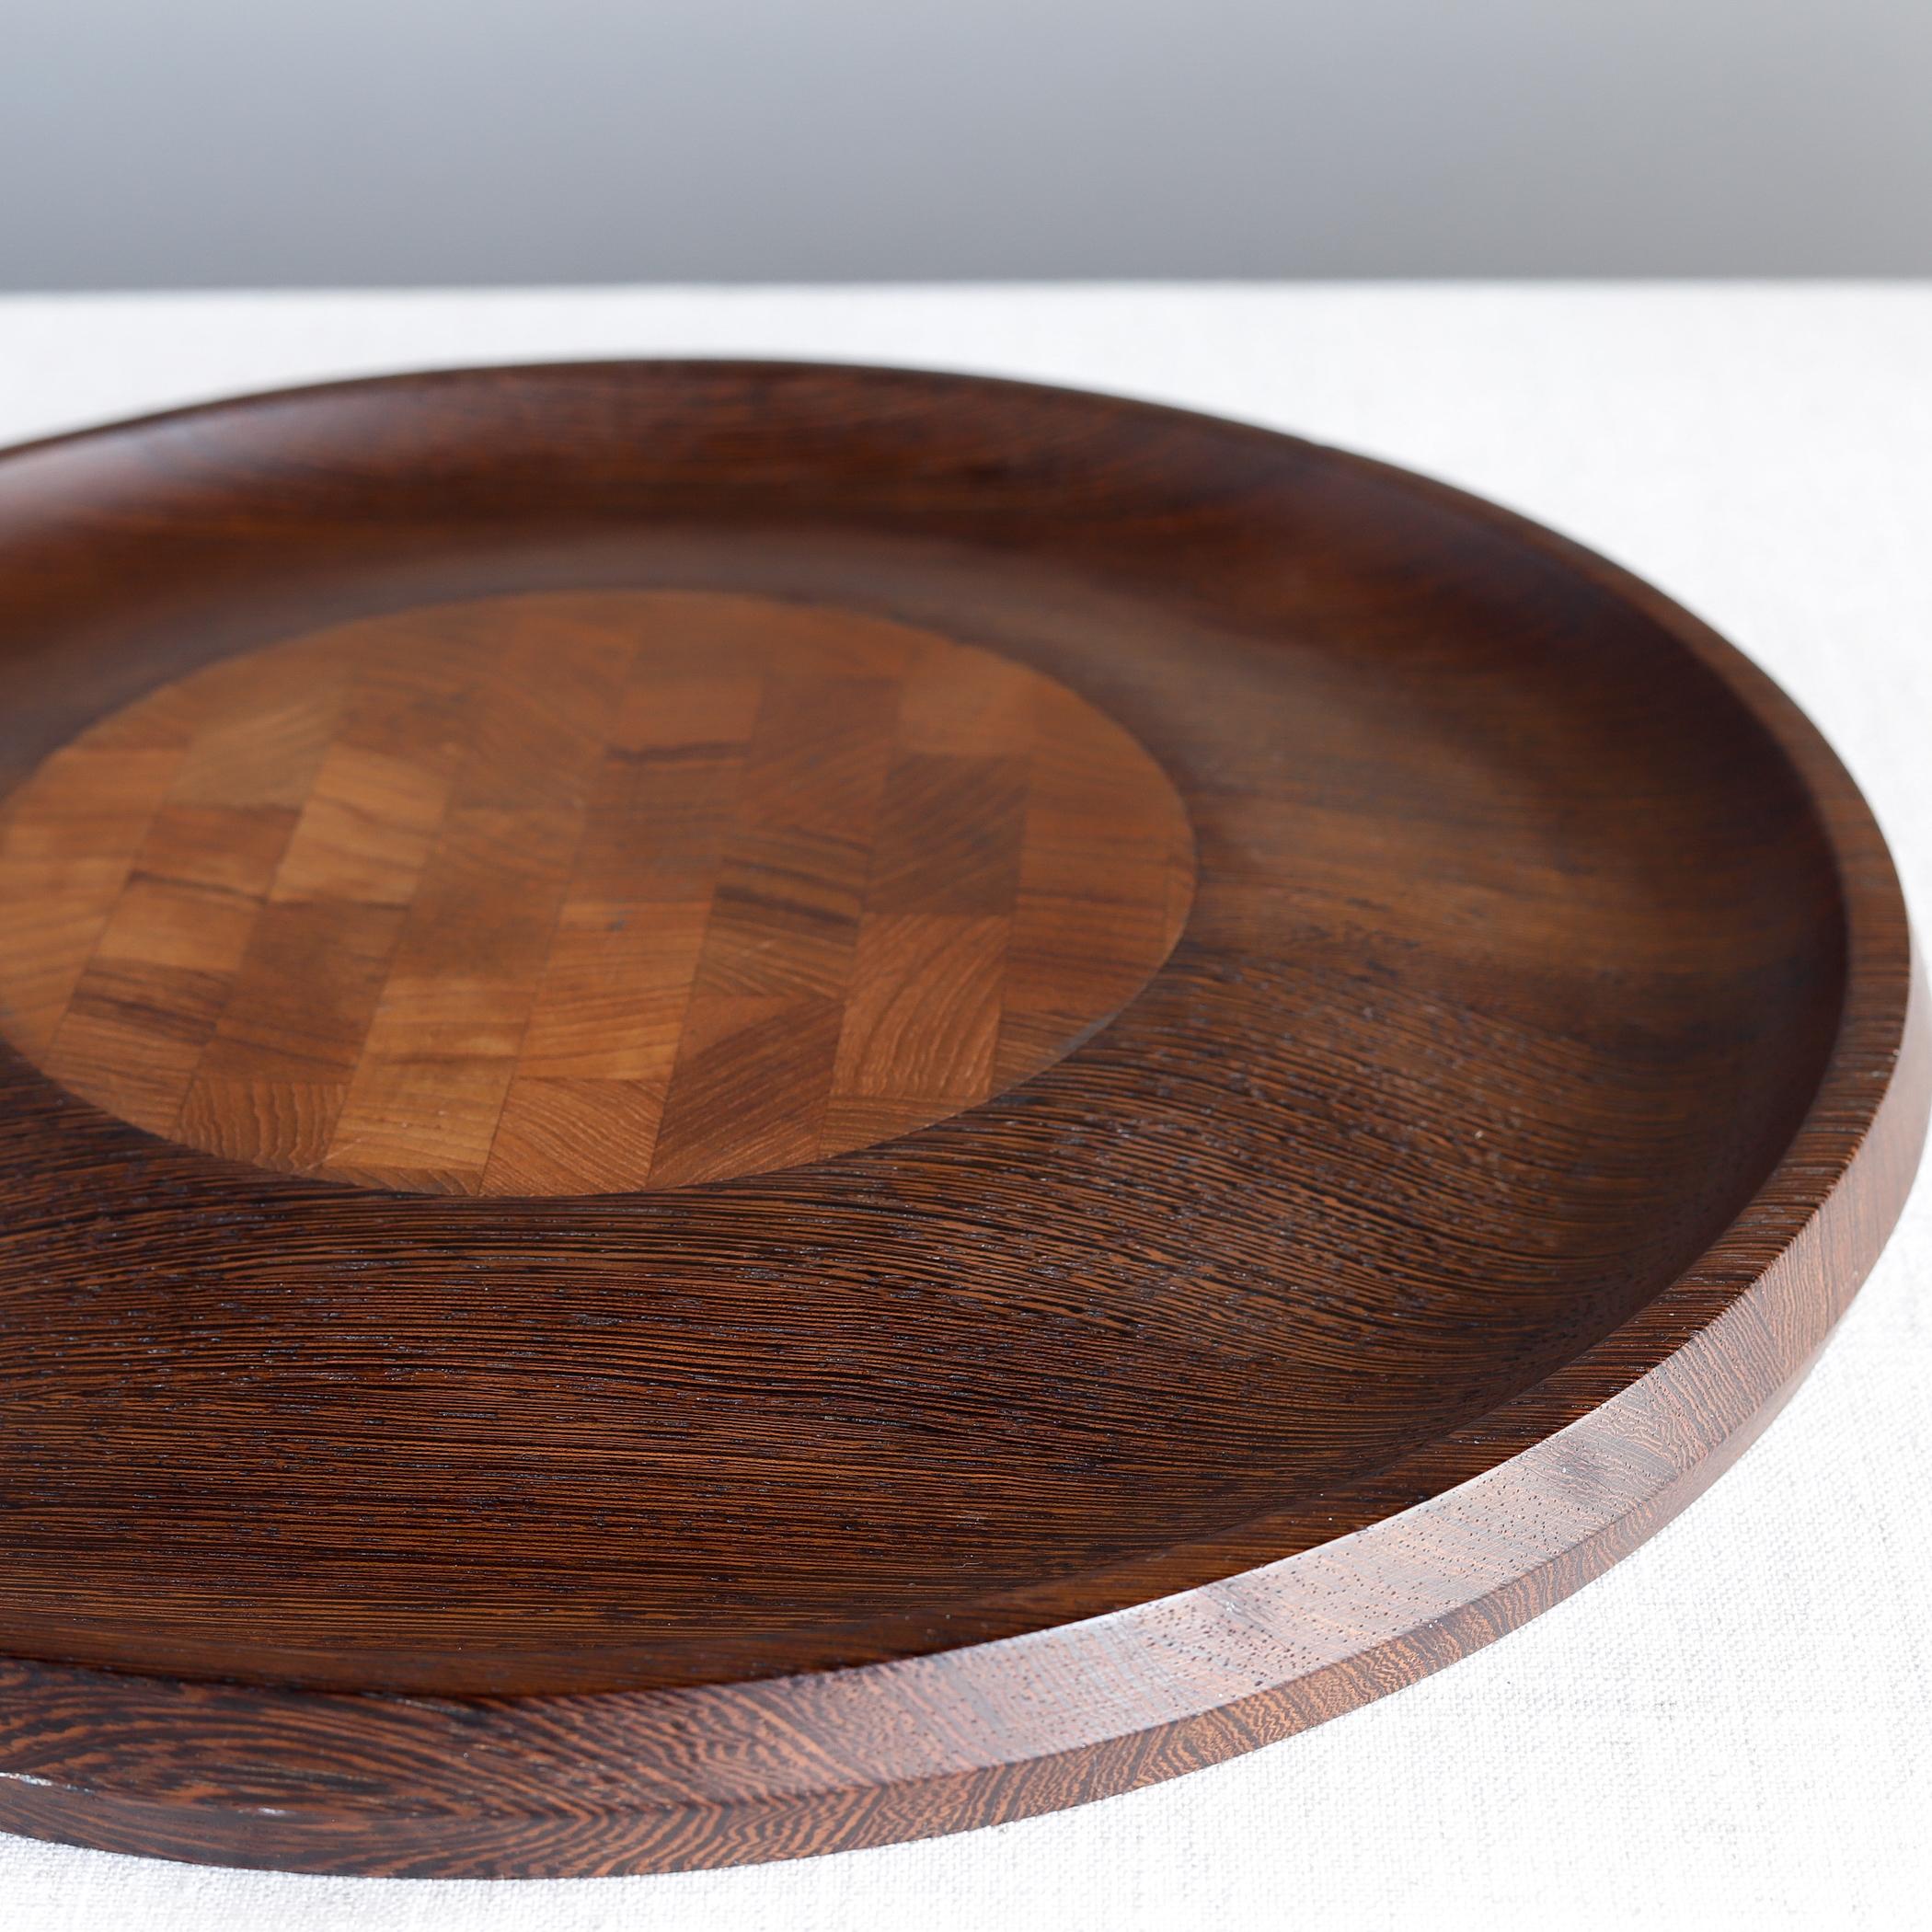 Mid-20th Century Dansk Wenge Cutting Board, Rare Woods End Grain Cheese Board Serving Tray, 1960 For Sale